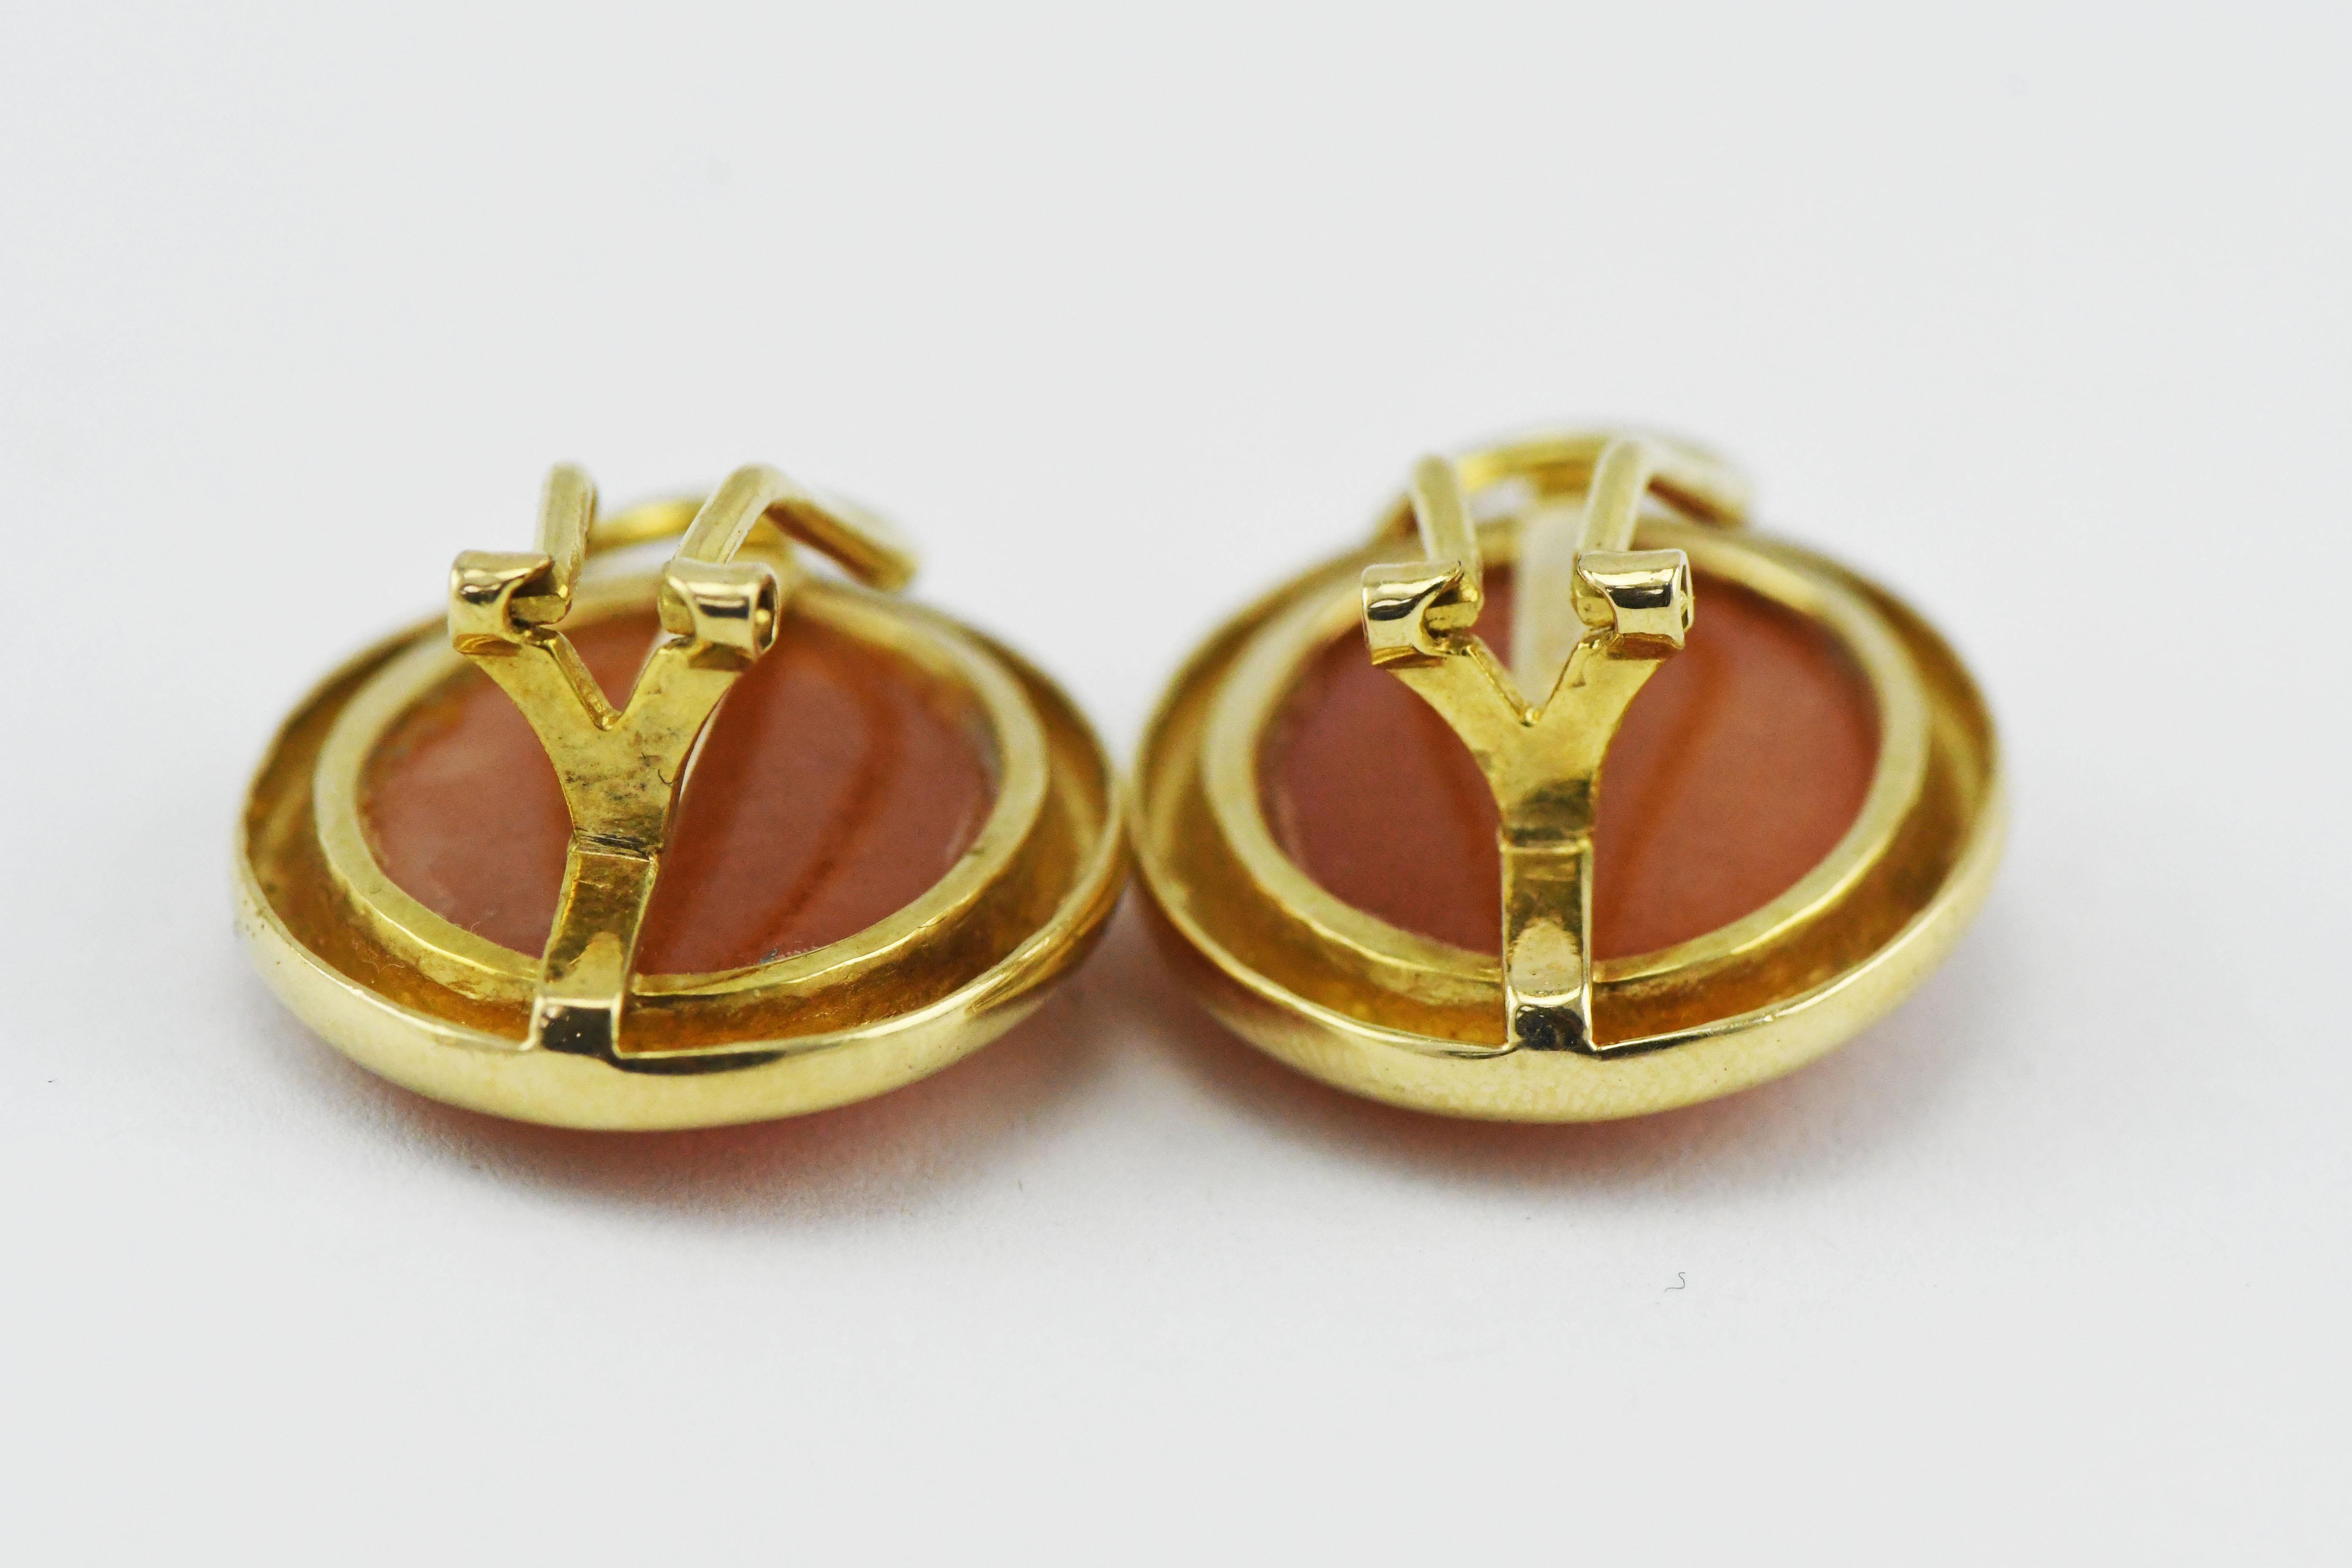 Oval Cut Tse Sui Luen 14k Gold Earrings with Cabochon Carved Carnelian with Omega Backs For Sale